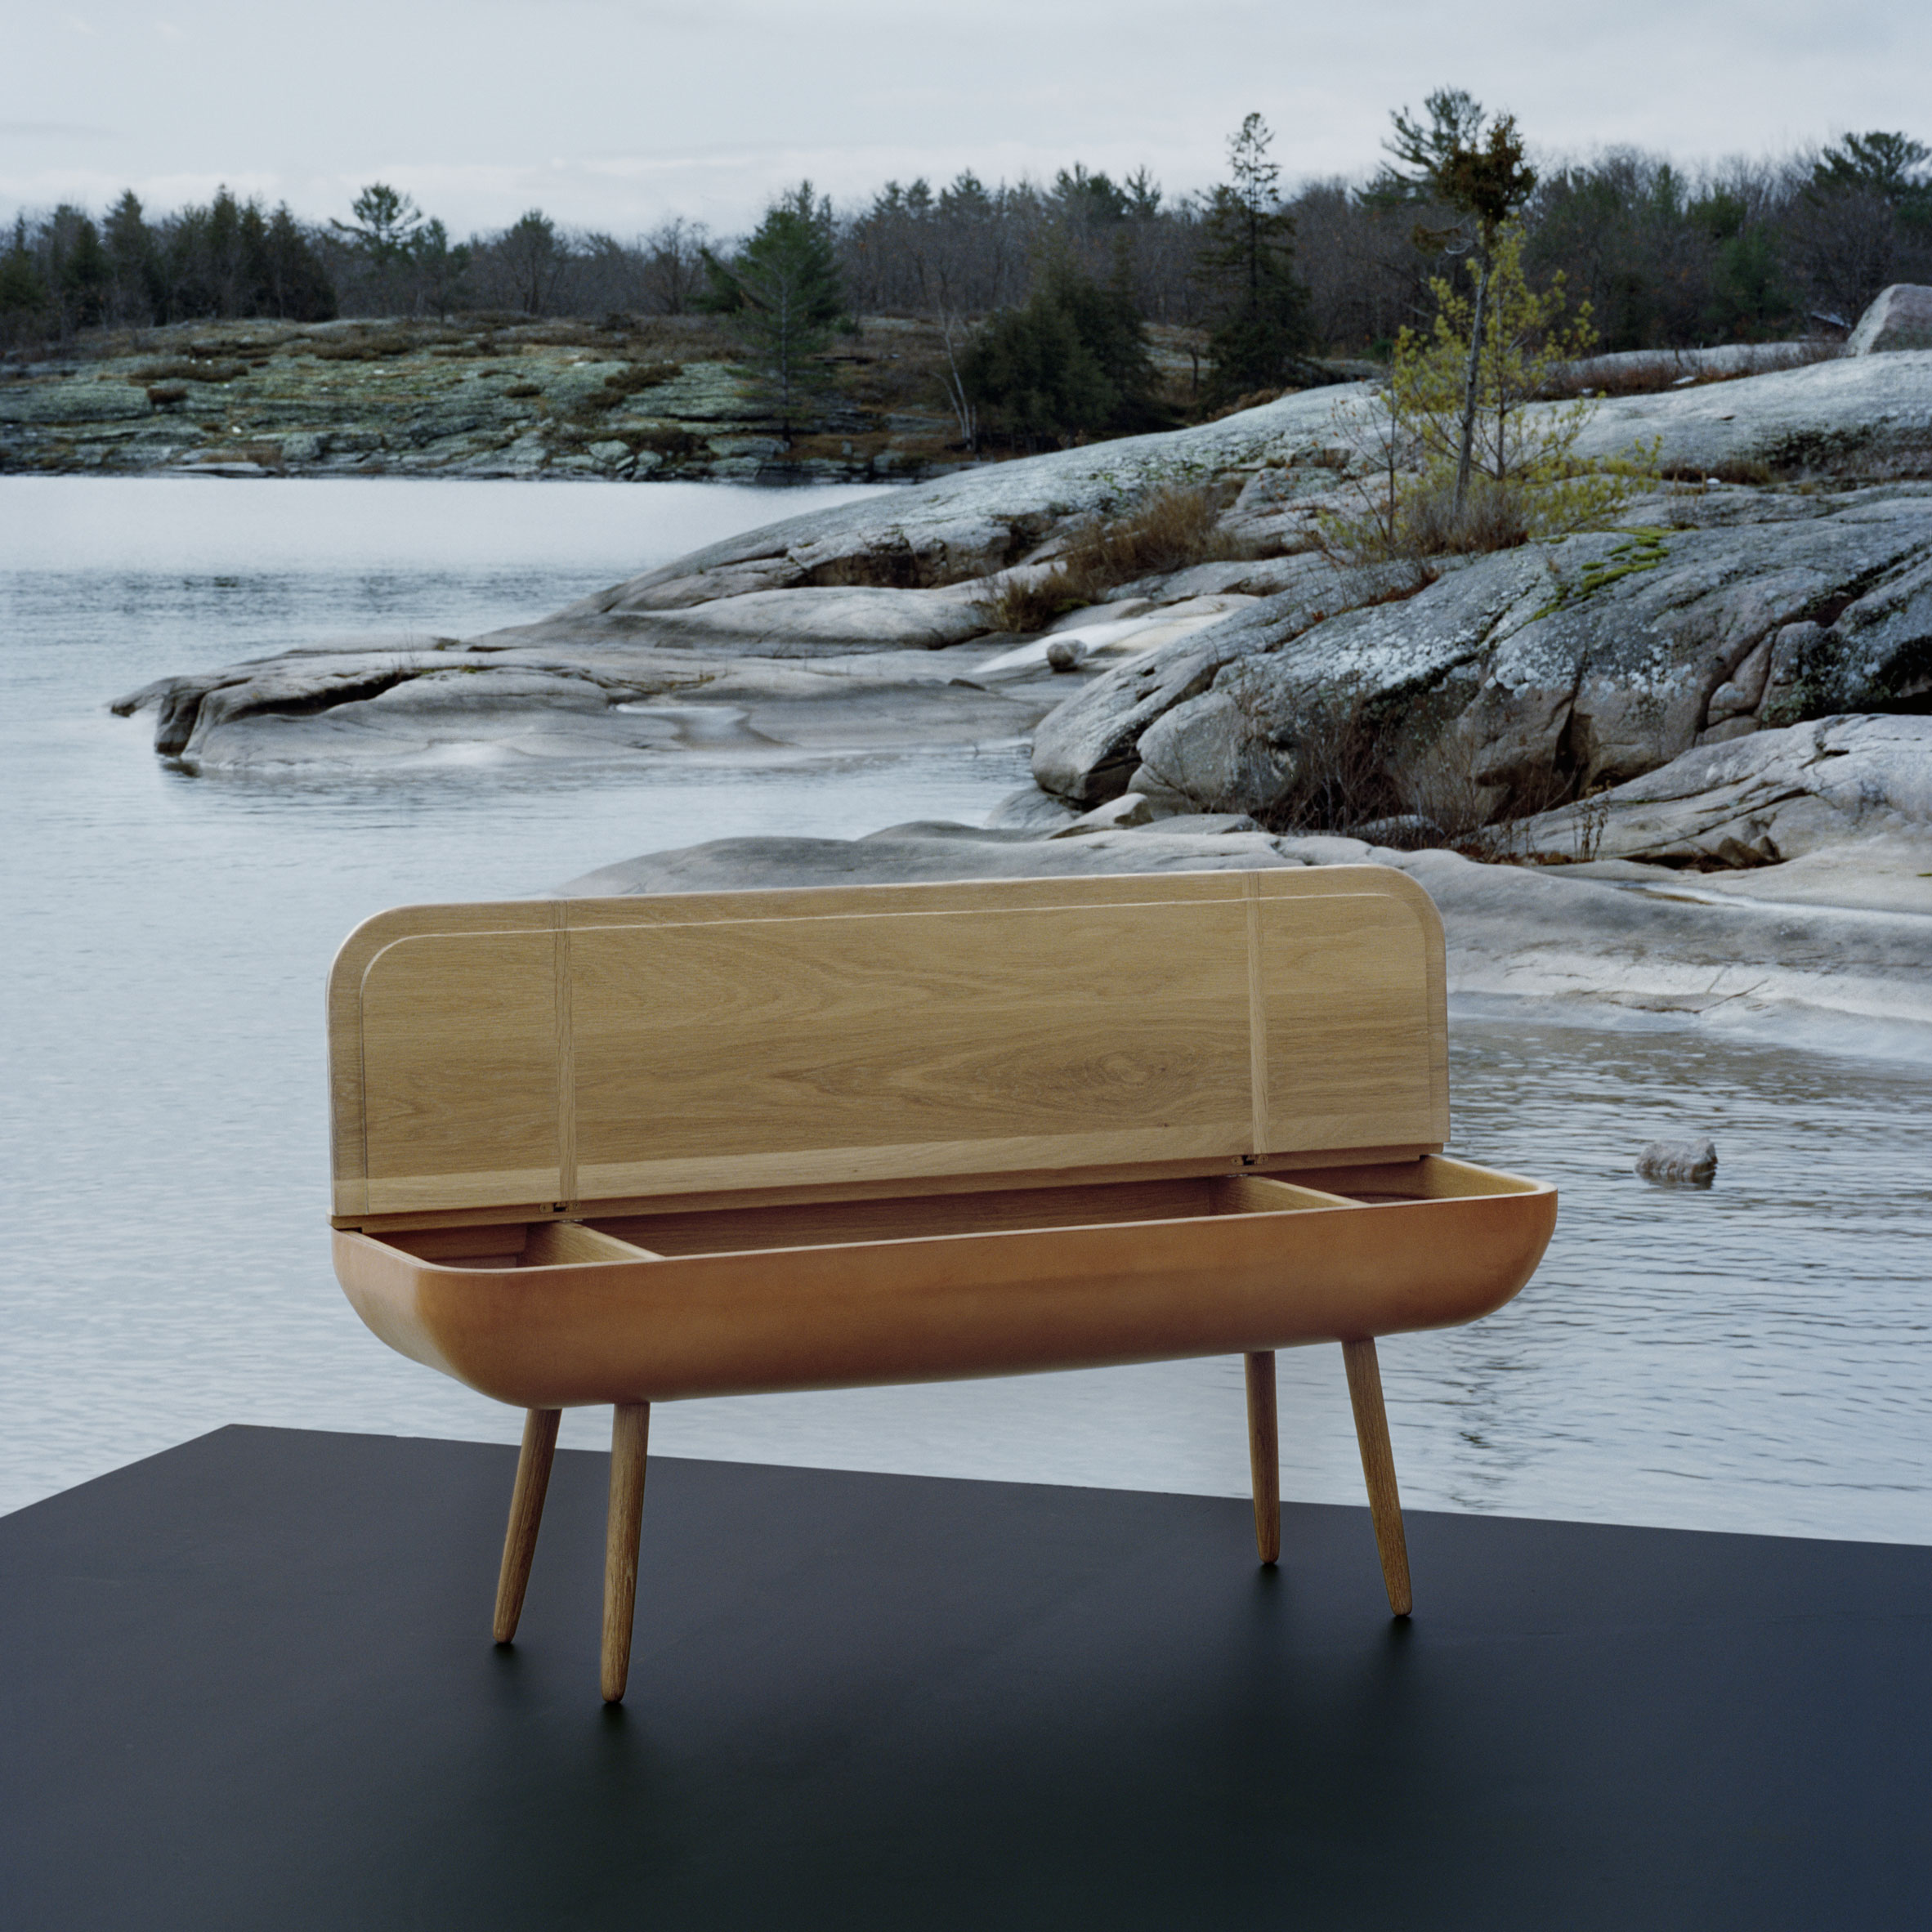 Coracle bench. Photograph by Matthew Tammaro